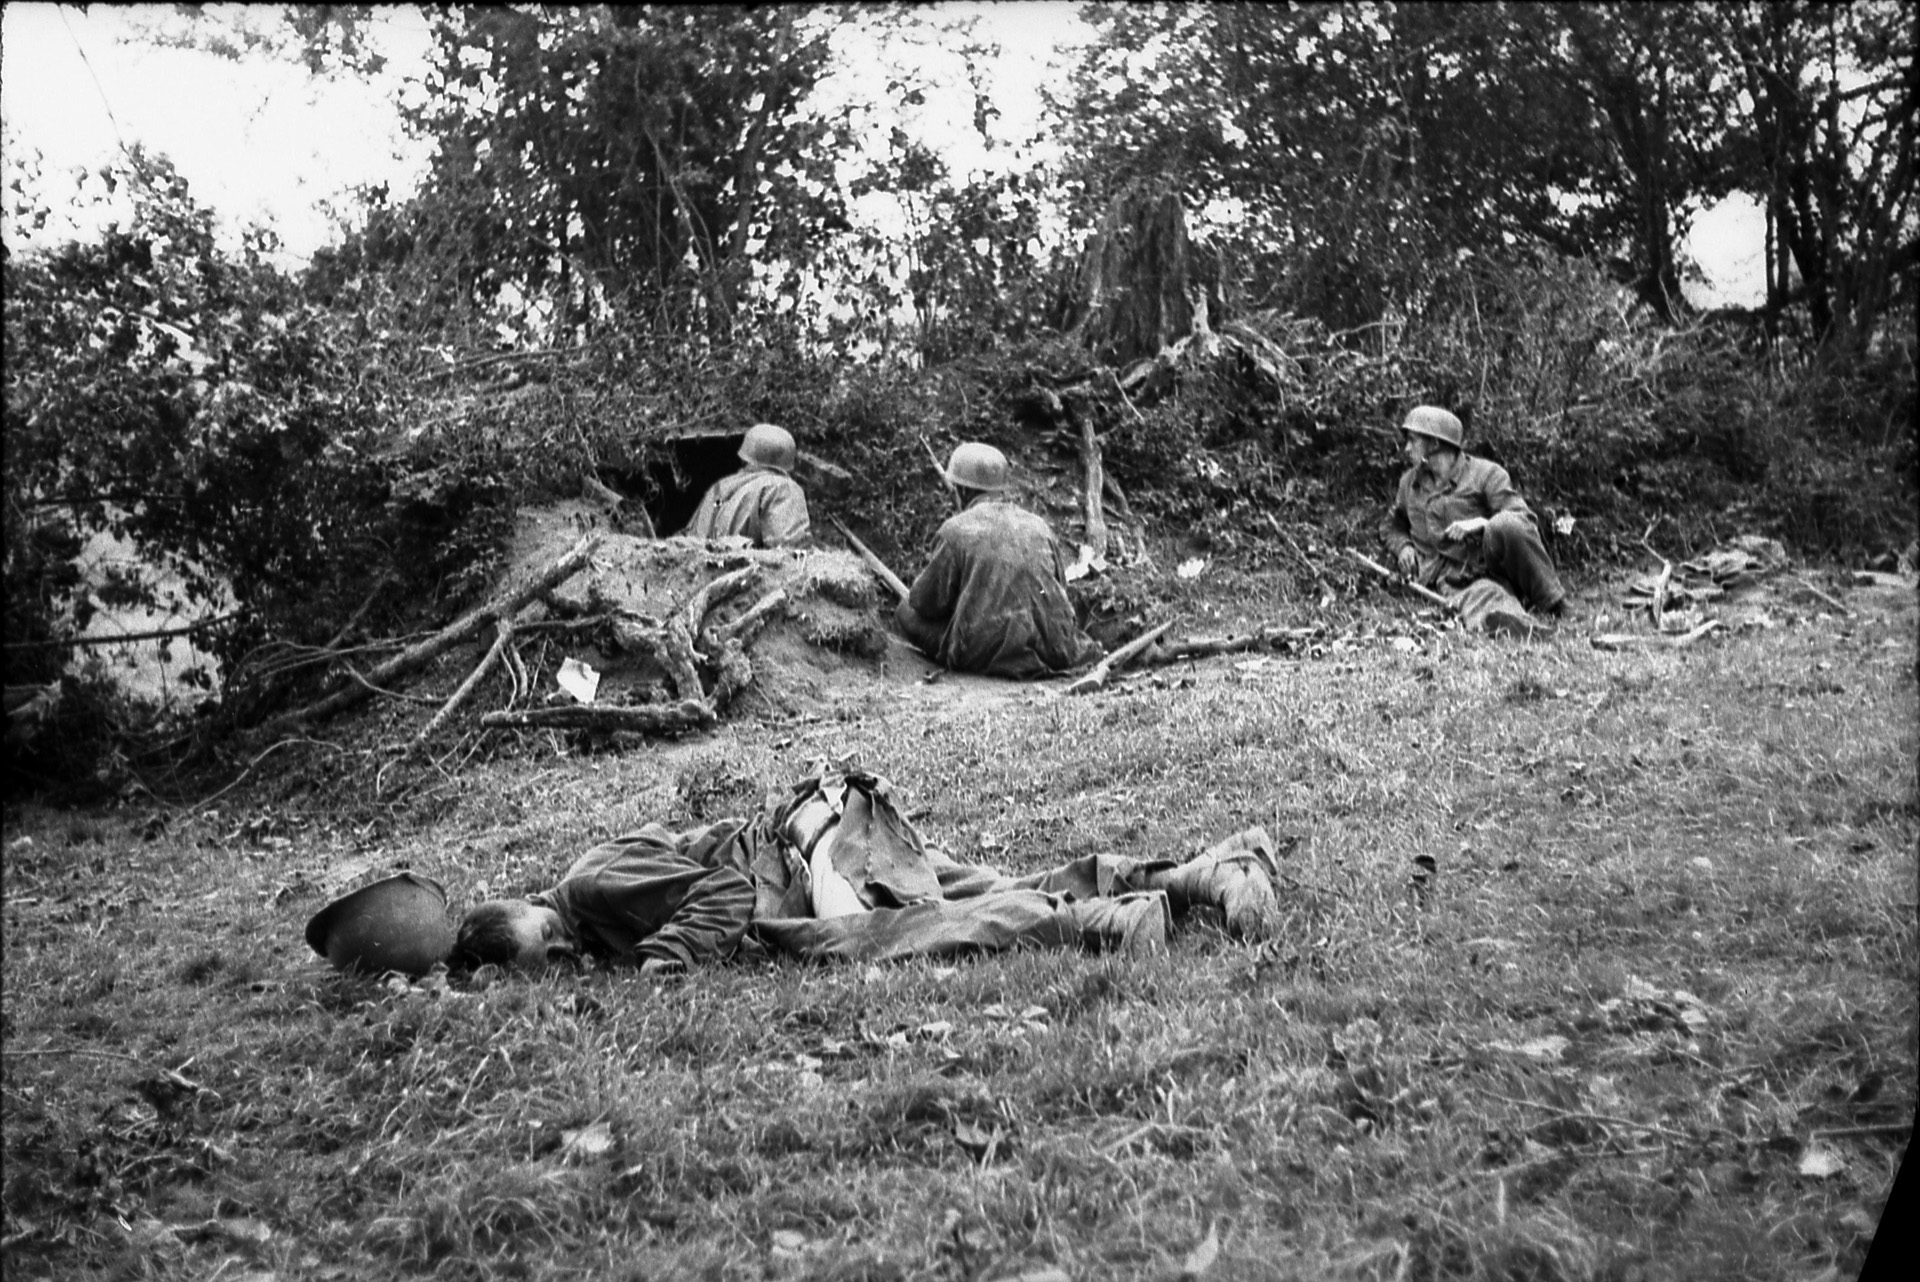 German Fallschirmjägers (paratroopers) ignore the body of a dead American and take cover behind a thick hedgerow in Germany. The hedgerows were unexpected obstacles faced by the invaders, bogged down the advance.